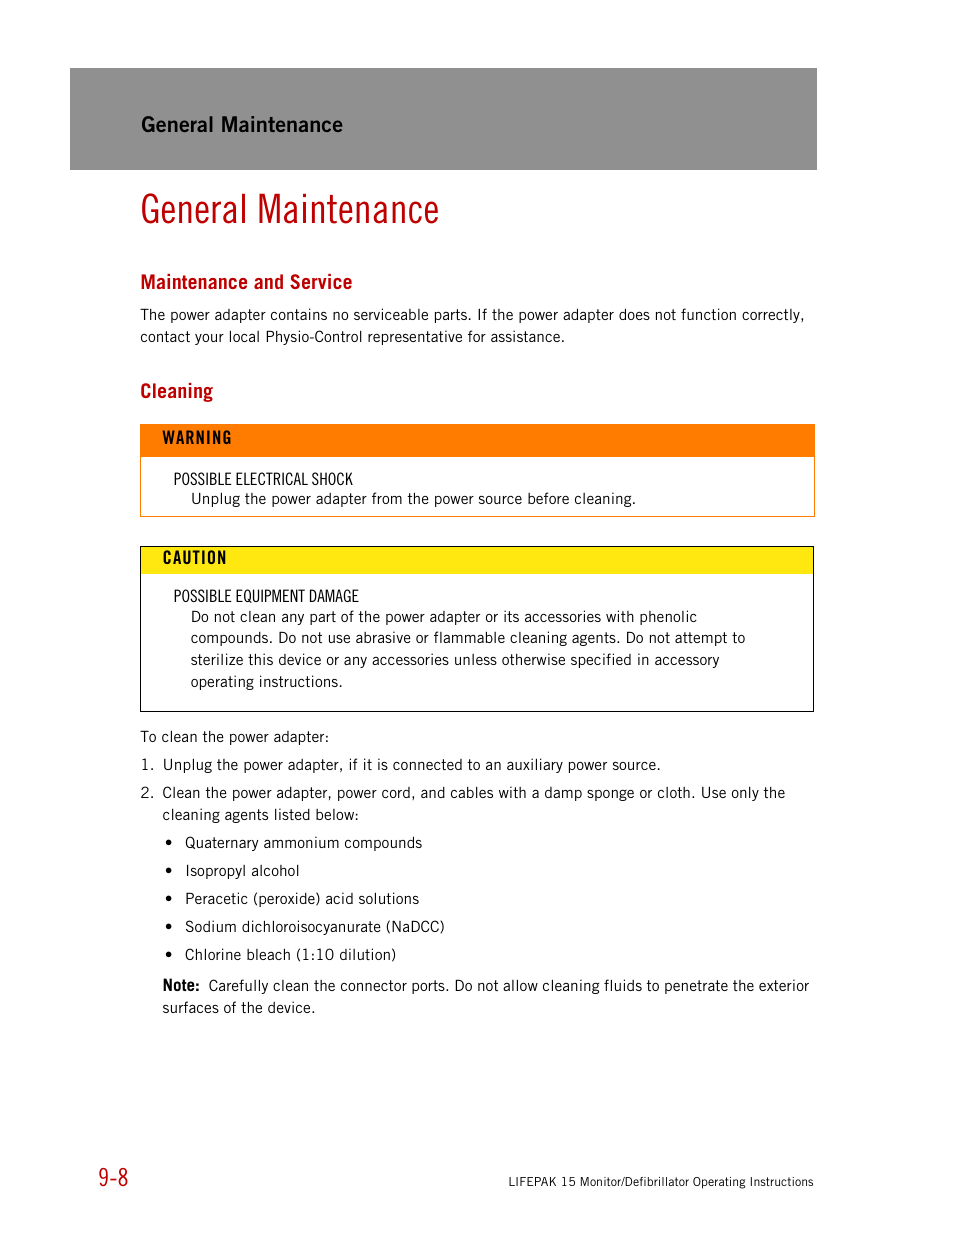 General maintenance, Maintenance and service, Cleaning | Physio-Control